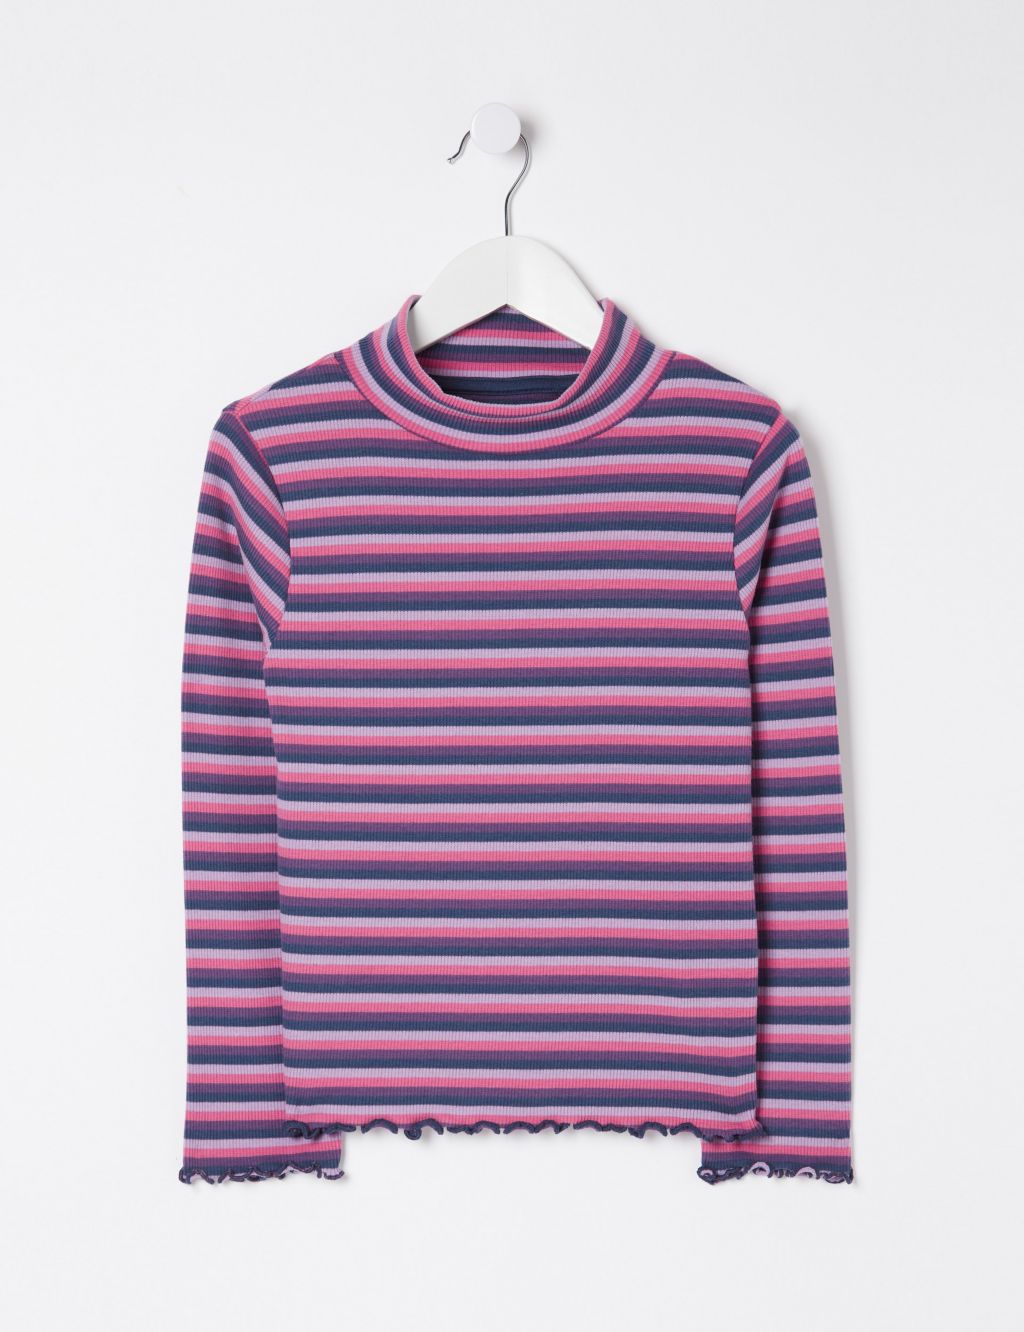 Cotton Blend Striped Ribbed Top (3-13 Yrs) image 2